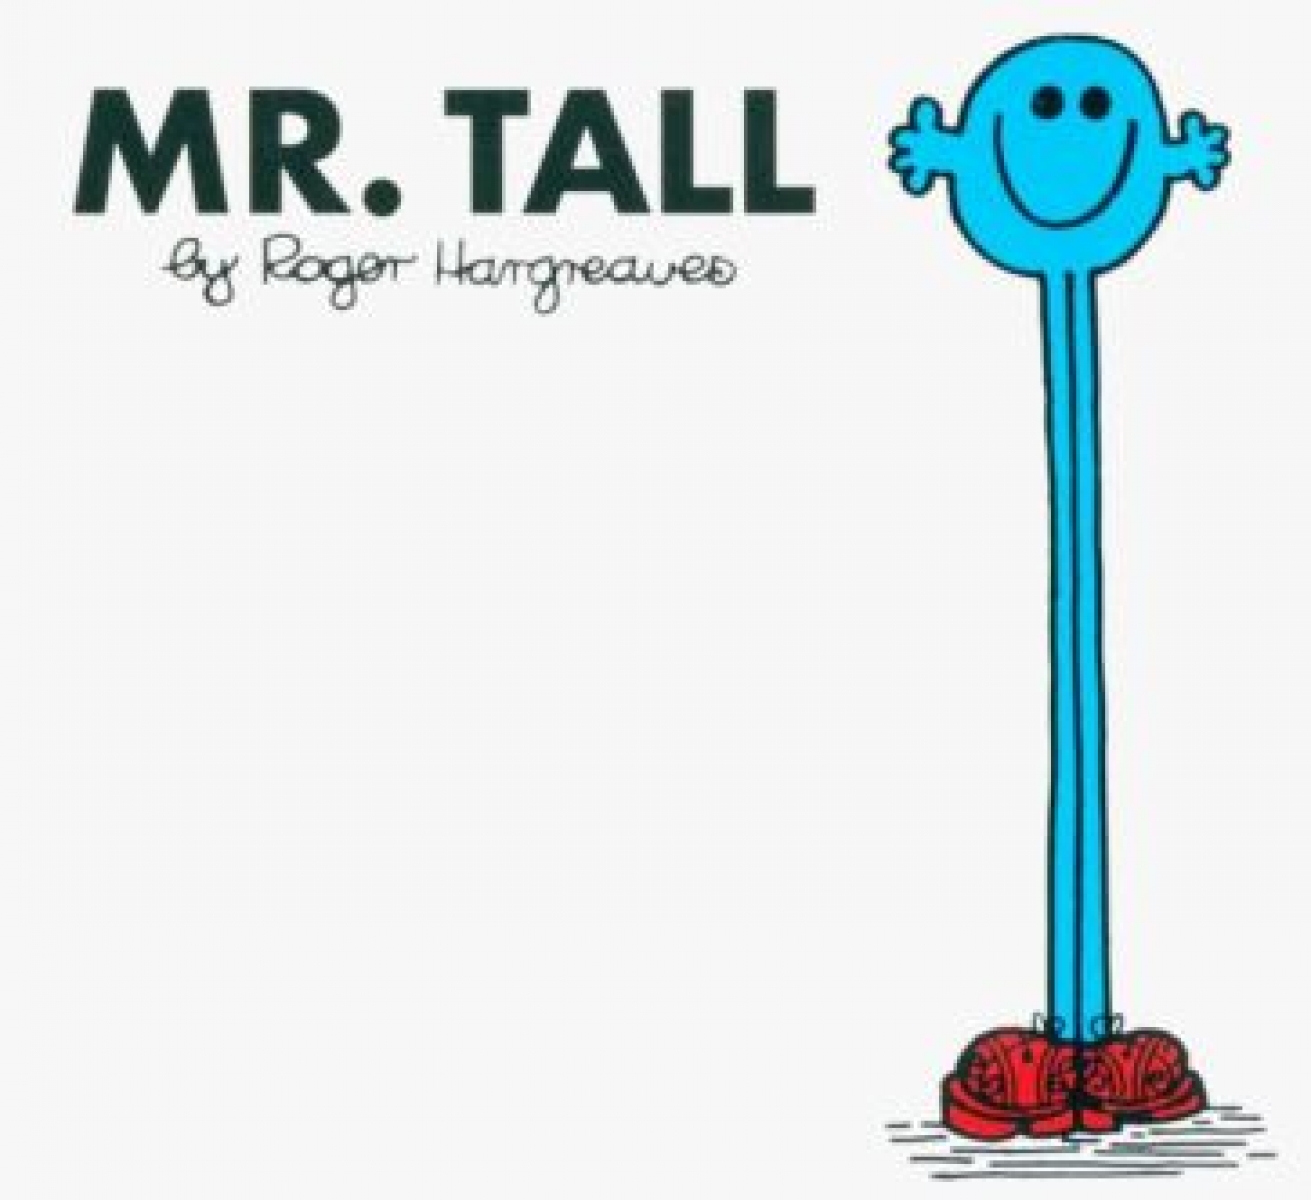 Hargreaves Roger Mr. Tall 